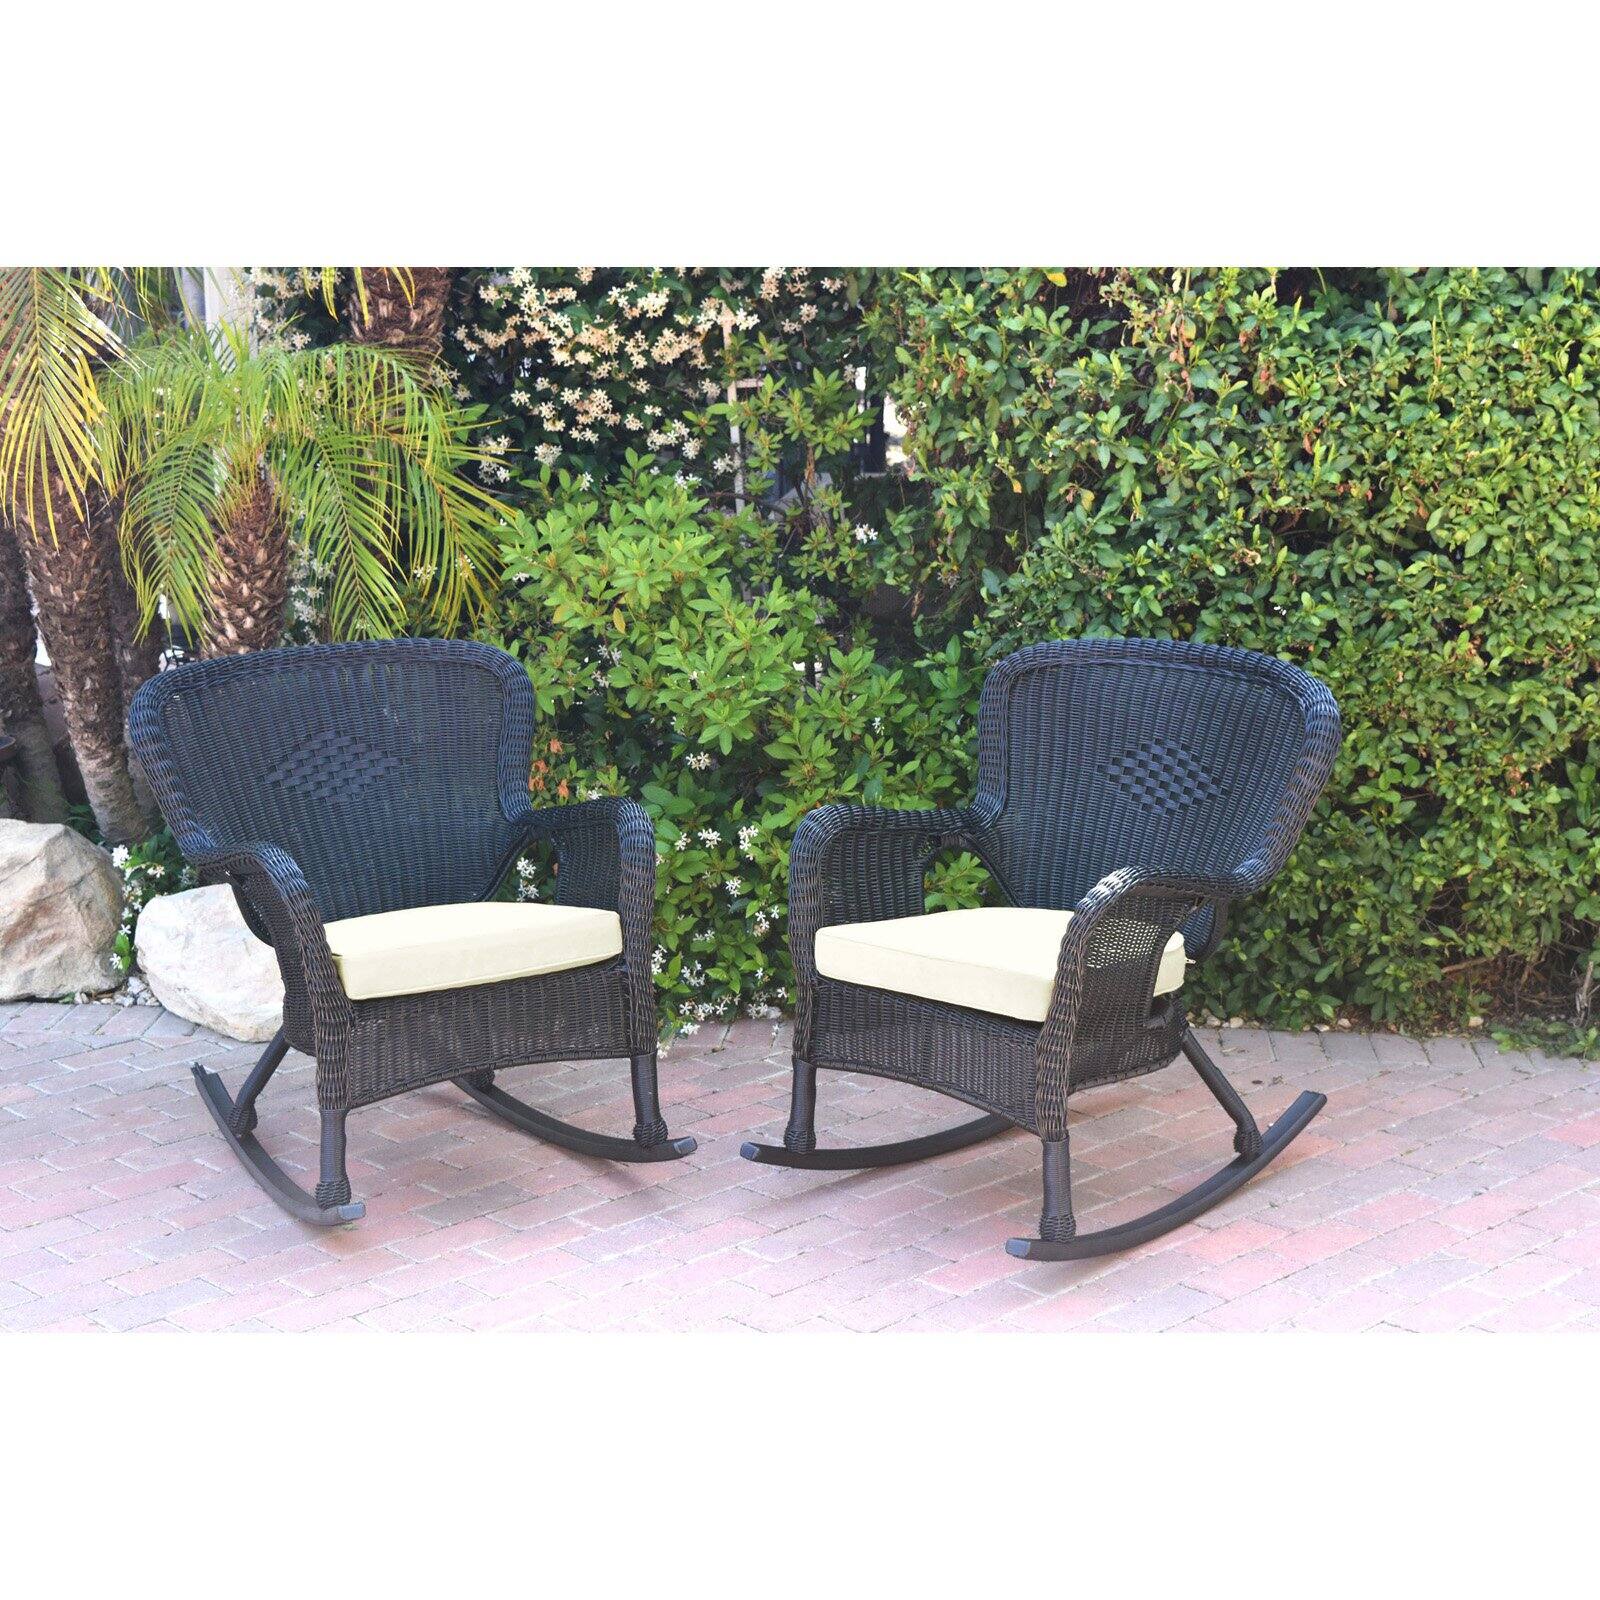 Jeco W00212-R-2-FS001 Windsor Honey Resin Wicker Rocker Chair with Ivory Cushions - Set of 2 - image 1 of 2